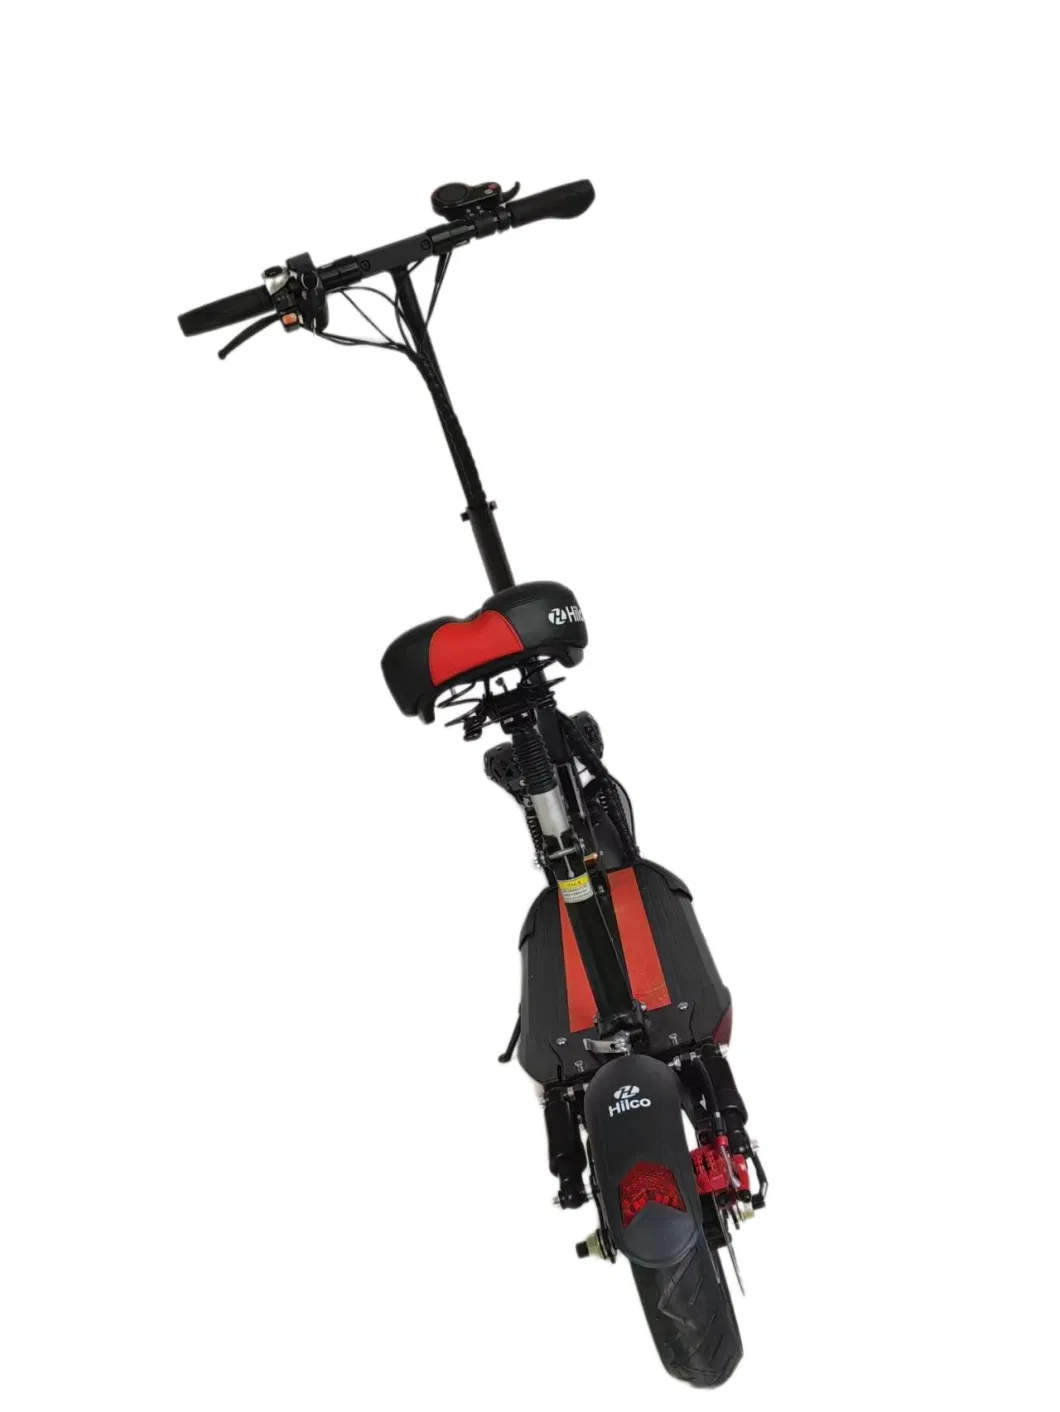 Premium Kds DC04 Electric Scooter/Bicycle, Detachable Seat, Urban Commuter